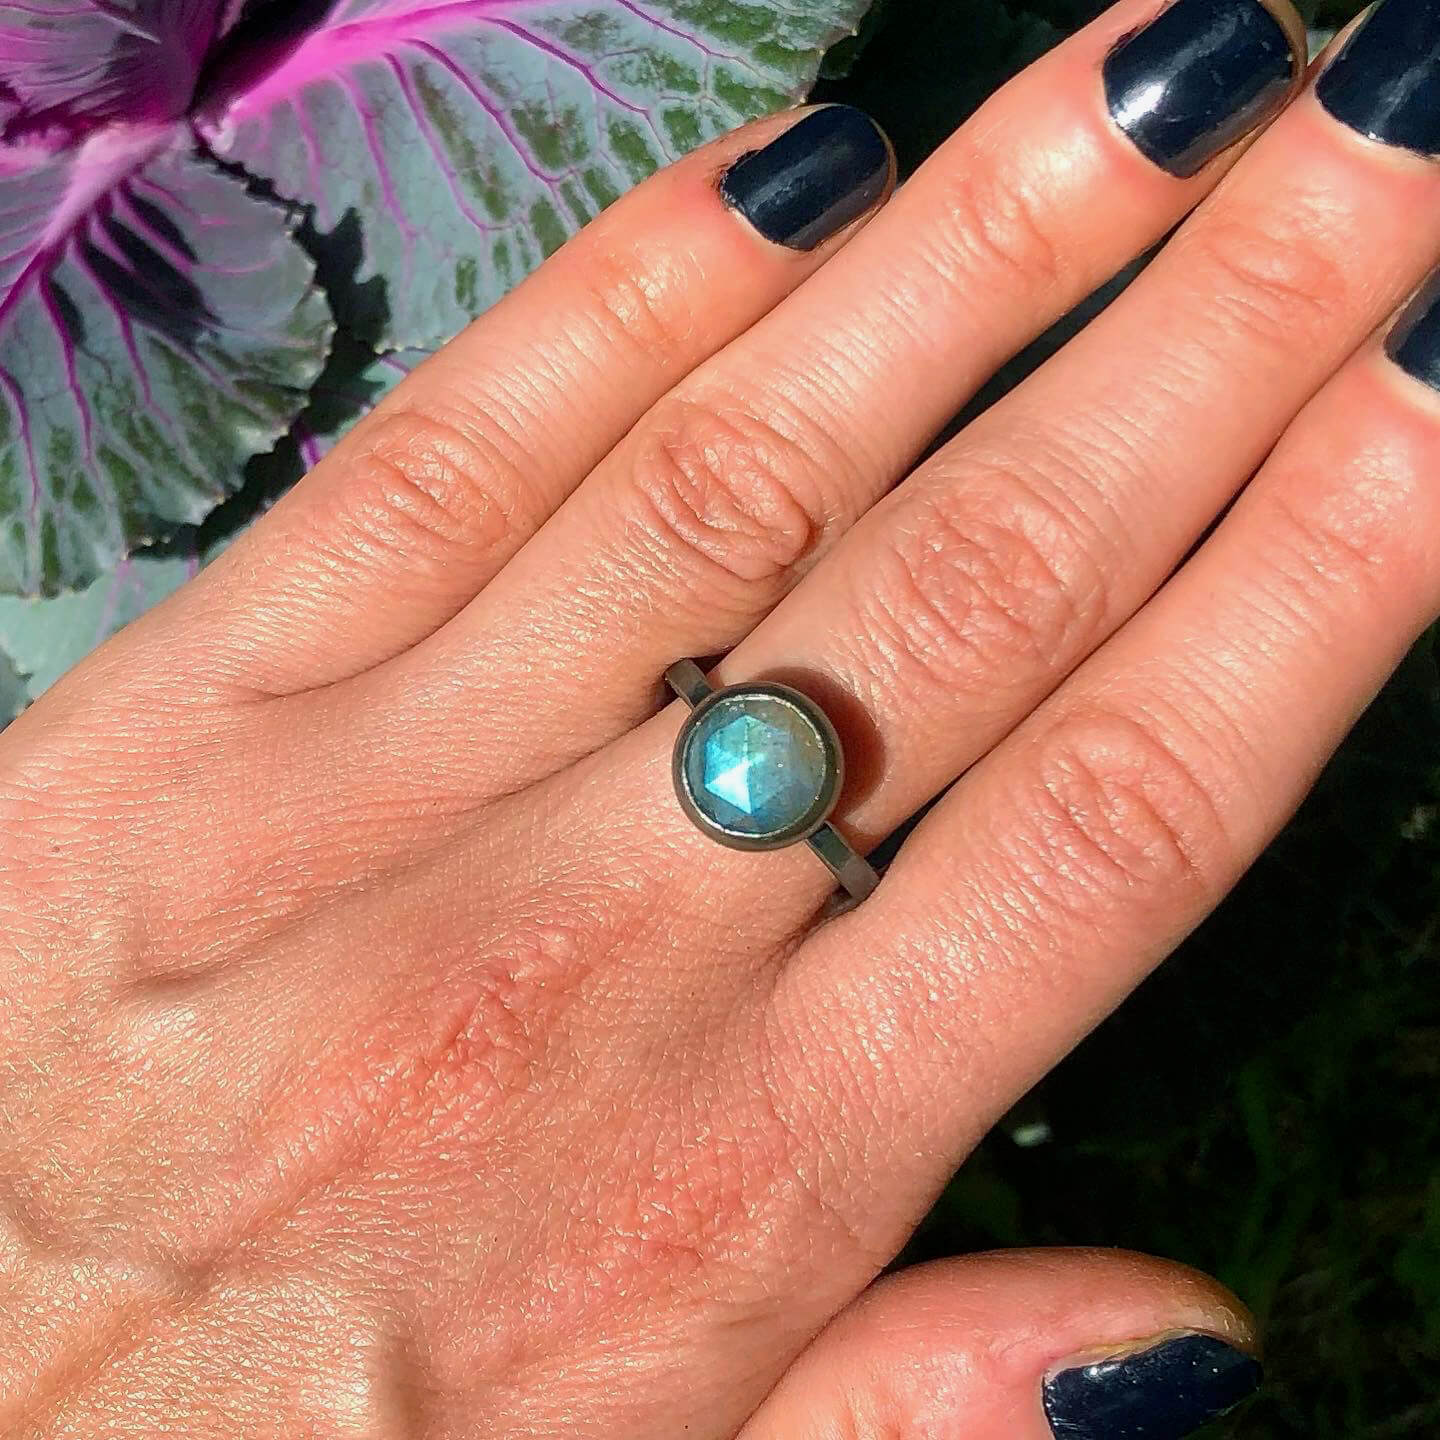 Labradorite Amulet Ring. Season of the Witch collection by Alex Lozier Jewelry.